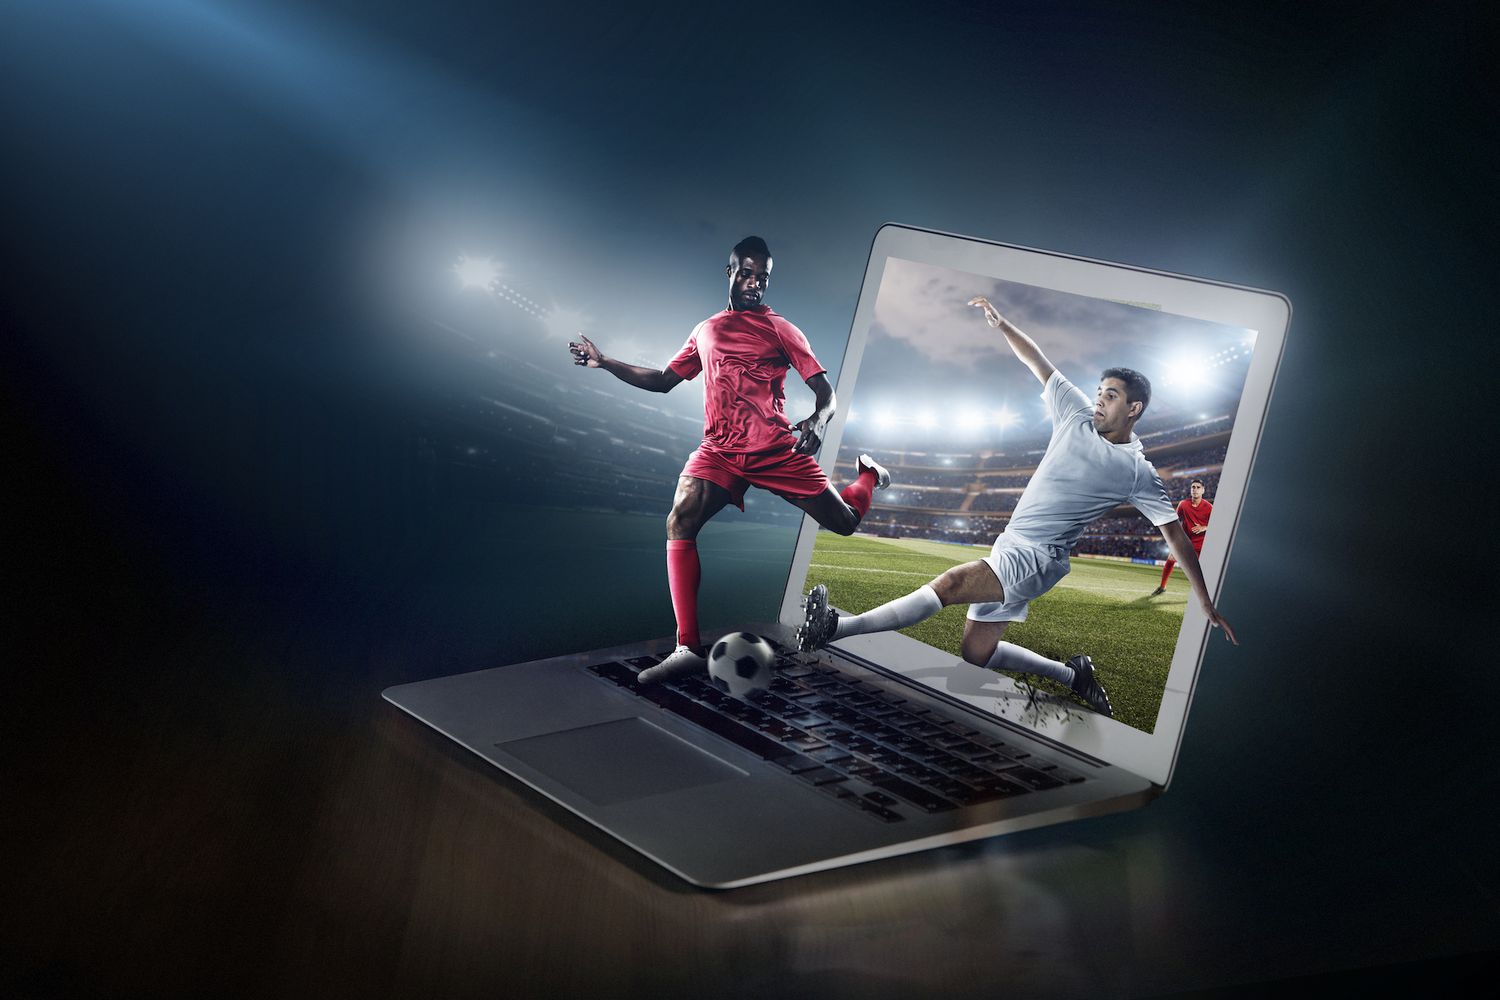 online sports streaming services